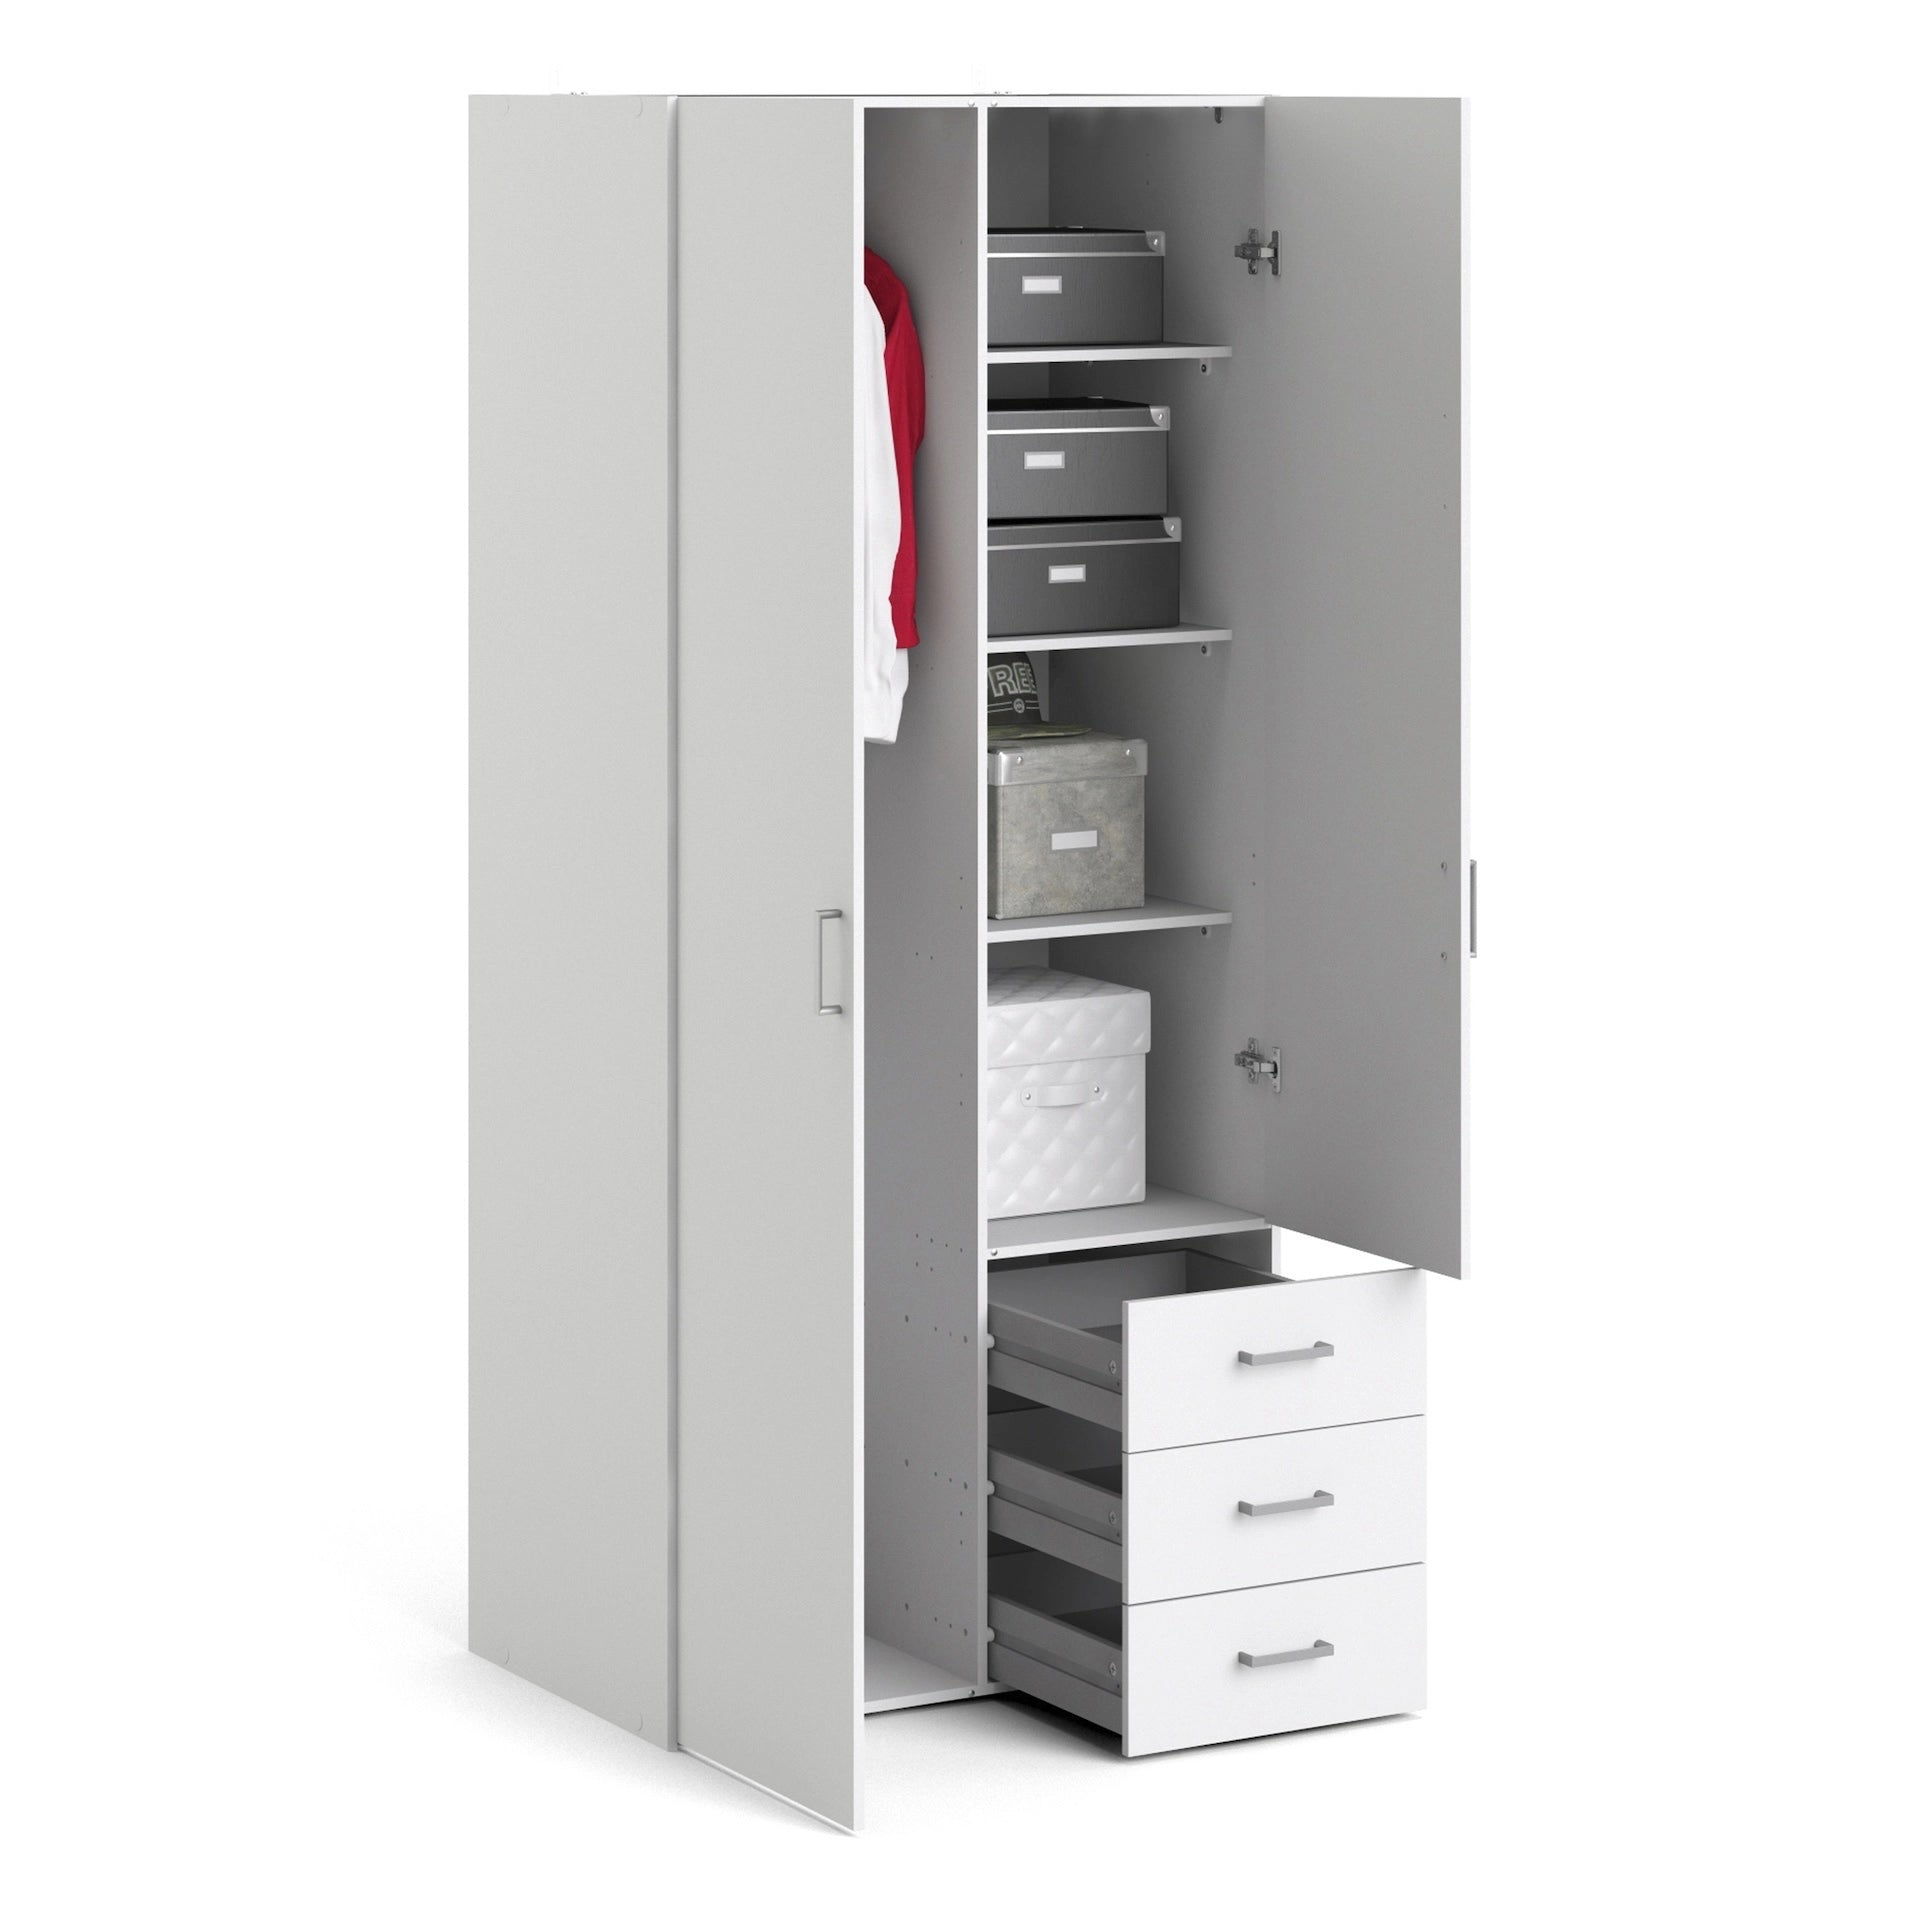 Furniture To Go Space Wardrobe with 2 Doors + 3 Drawers White 1750